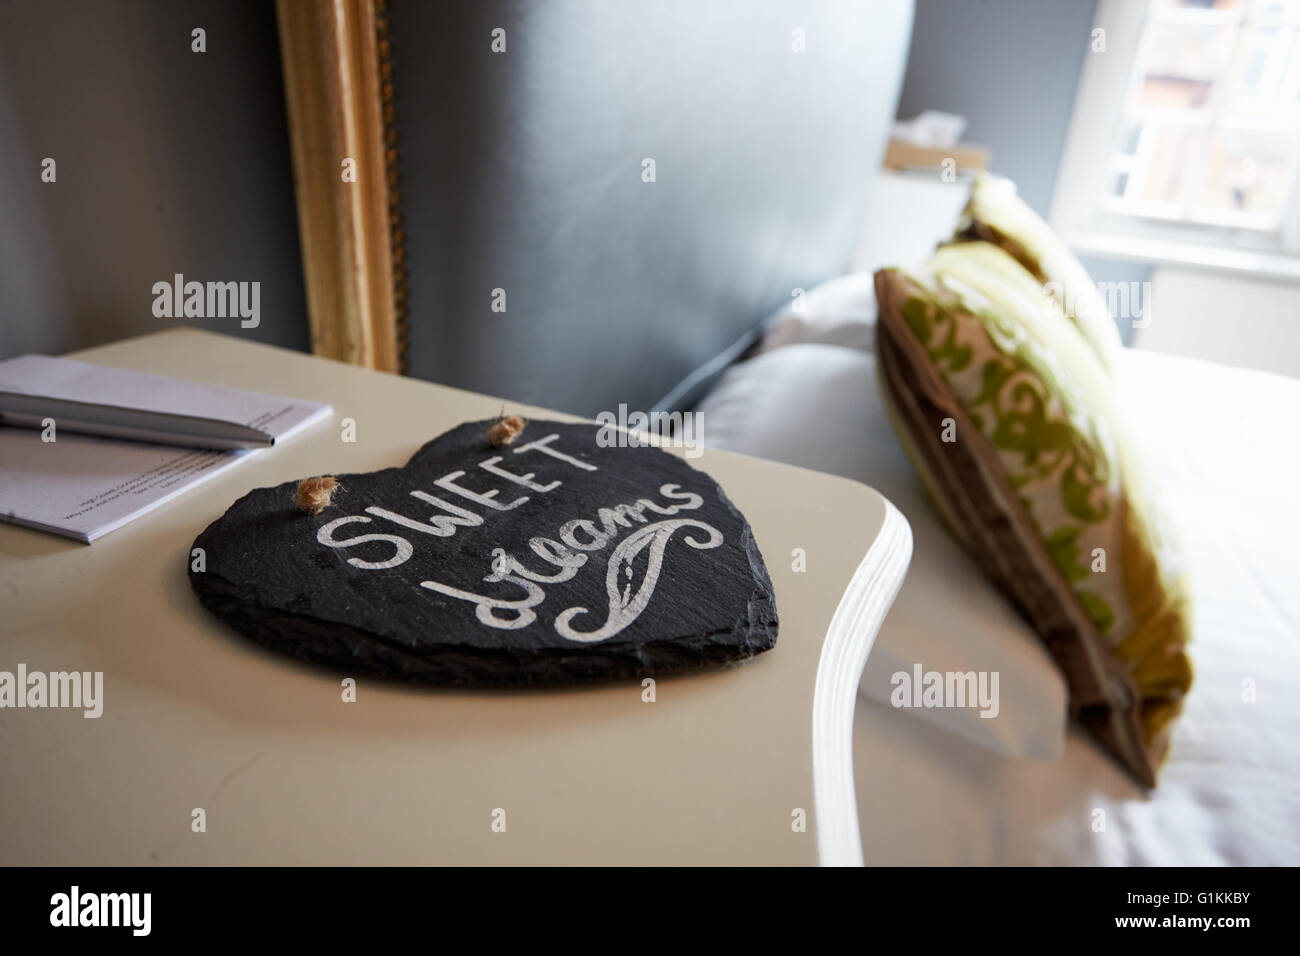 Sweet Dreams Printed On Slate Heart Next To Hotel Bedroom Stock Photo